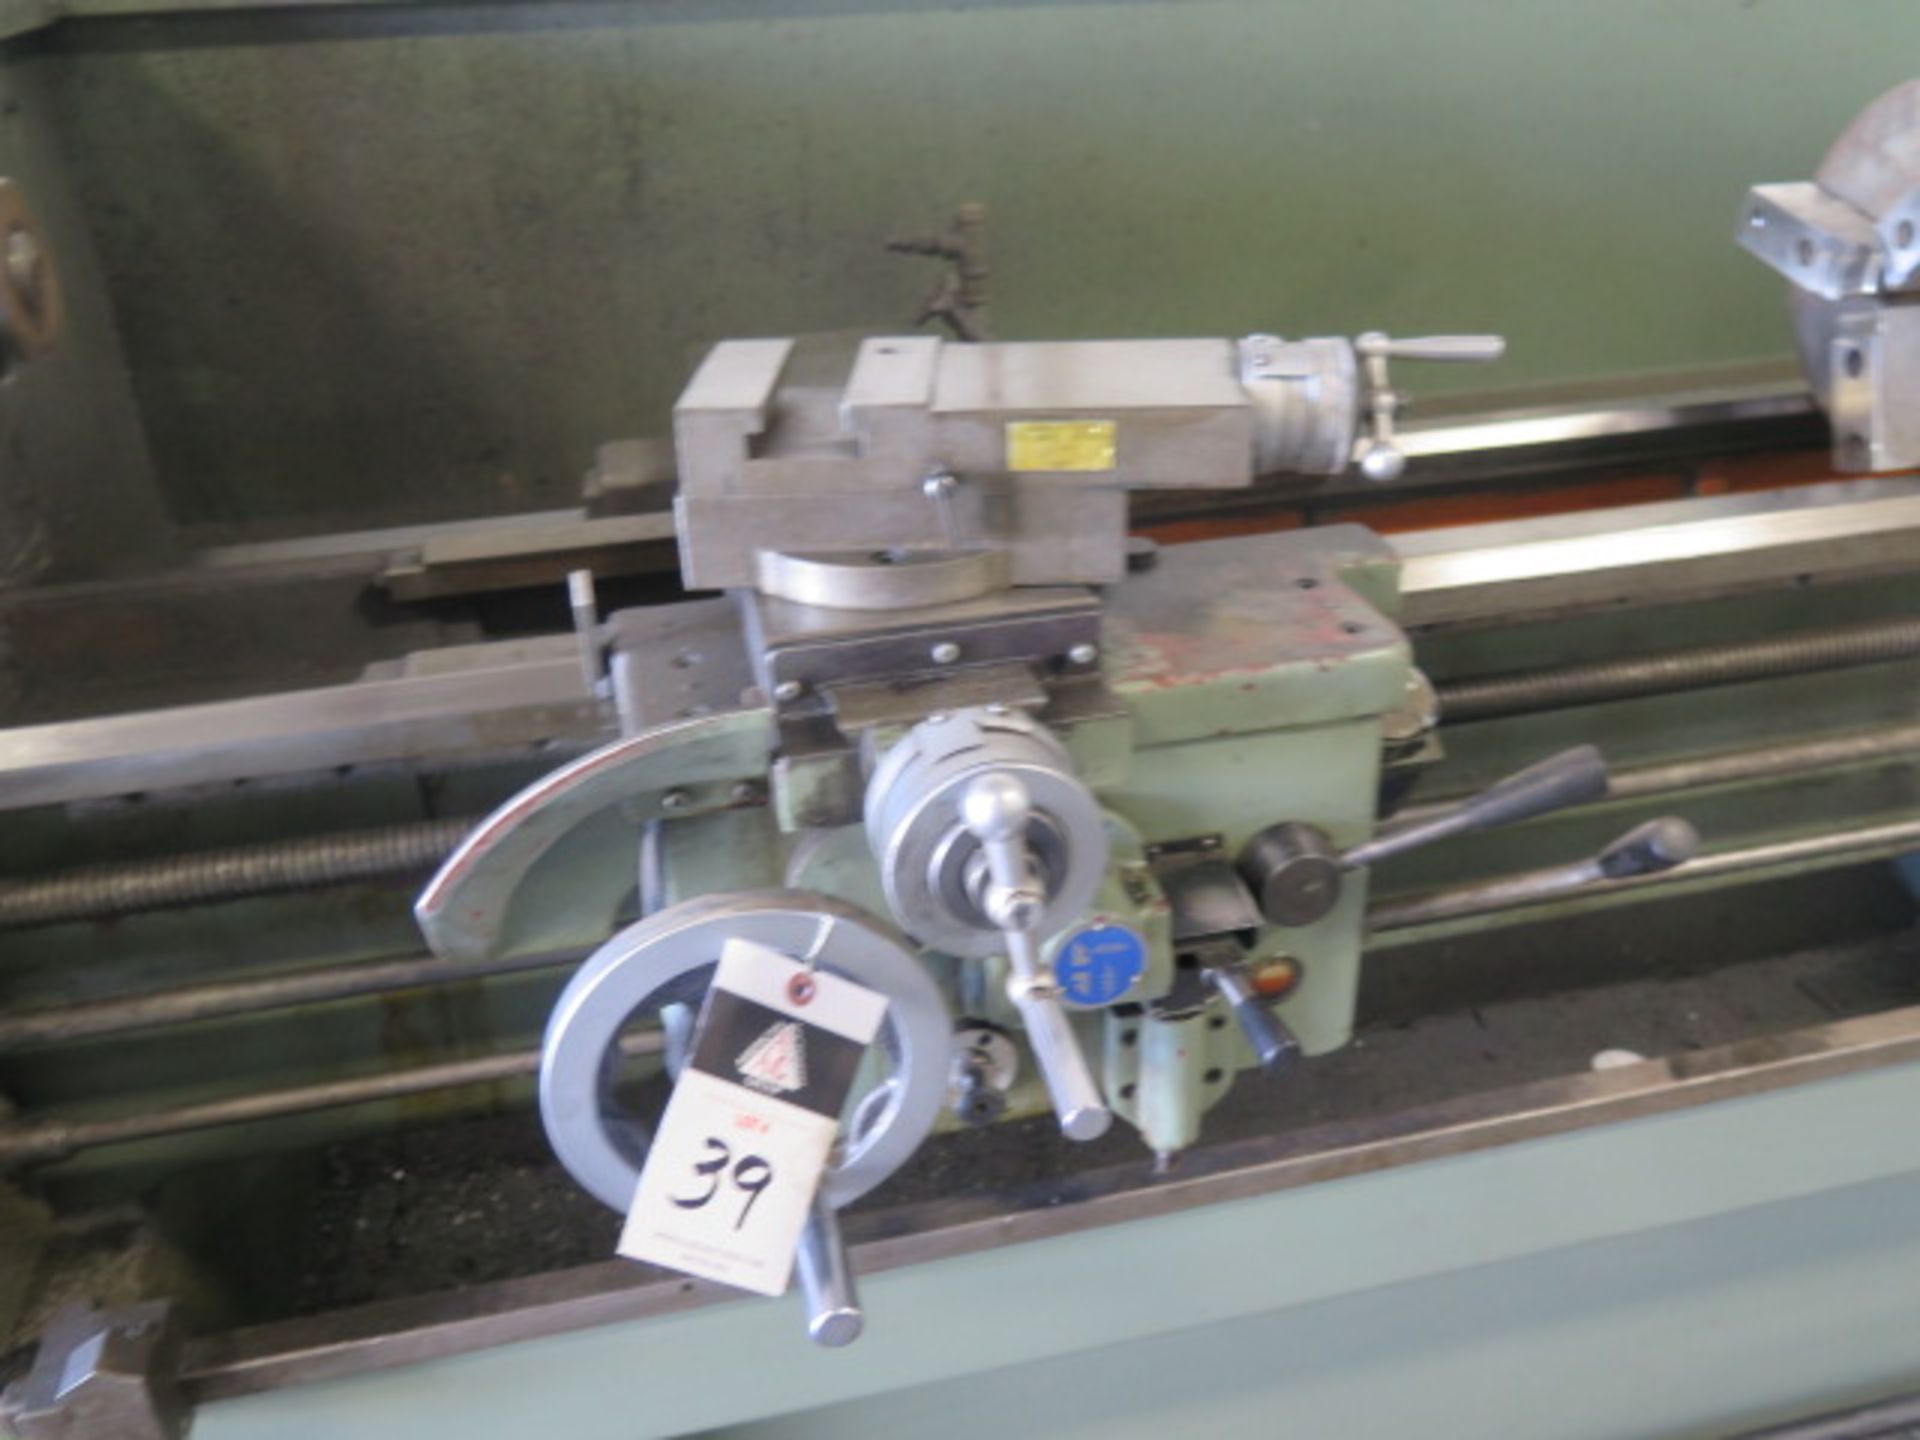 Goodway GW-1660 16" x 60" Geared Head Gap Bed Lathe w/ 33-2000 RPM, Inch/mm Threading, SOLD AS IS - Image 9 of 12